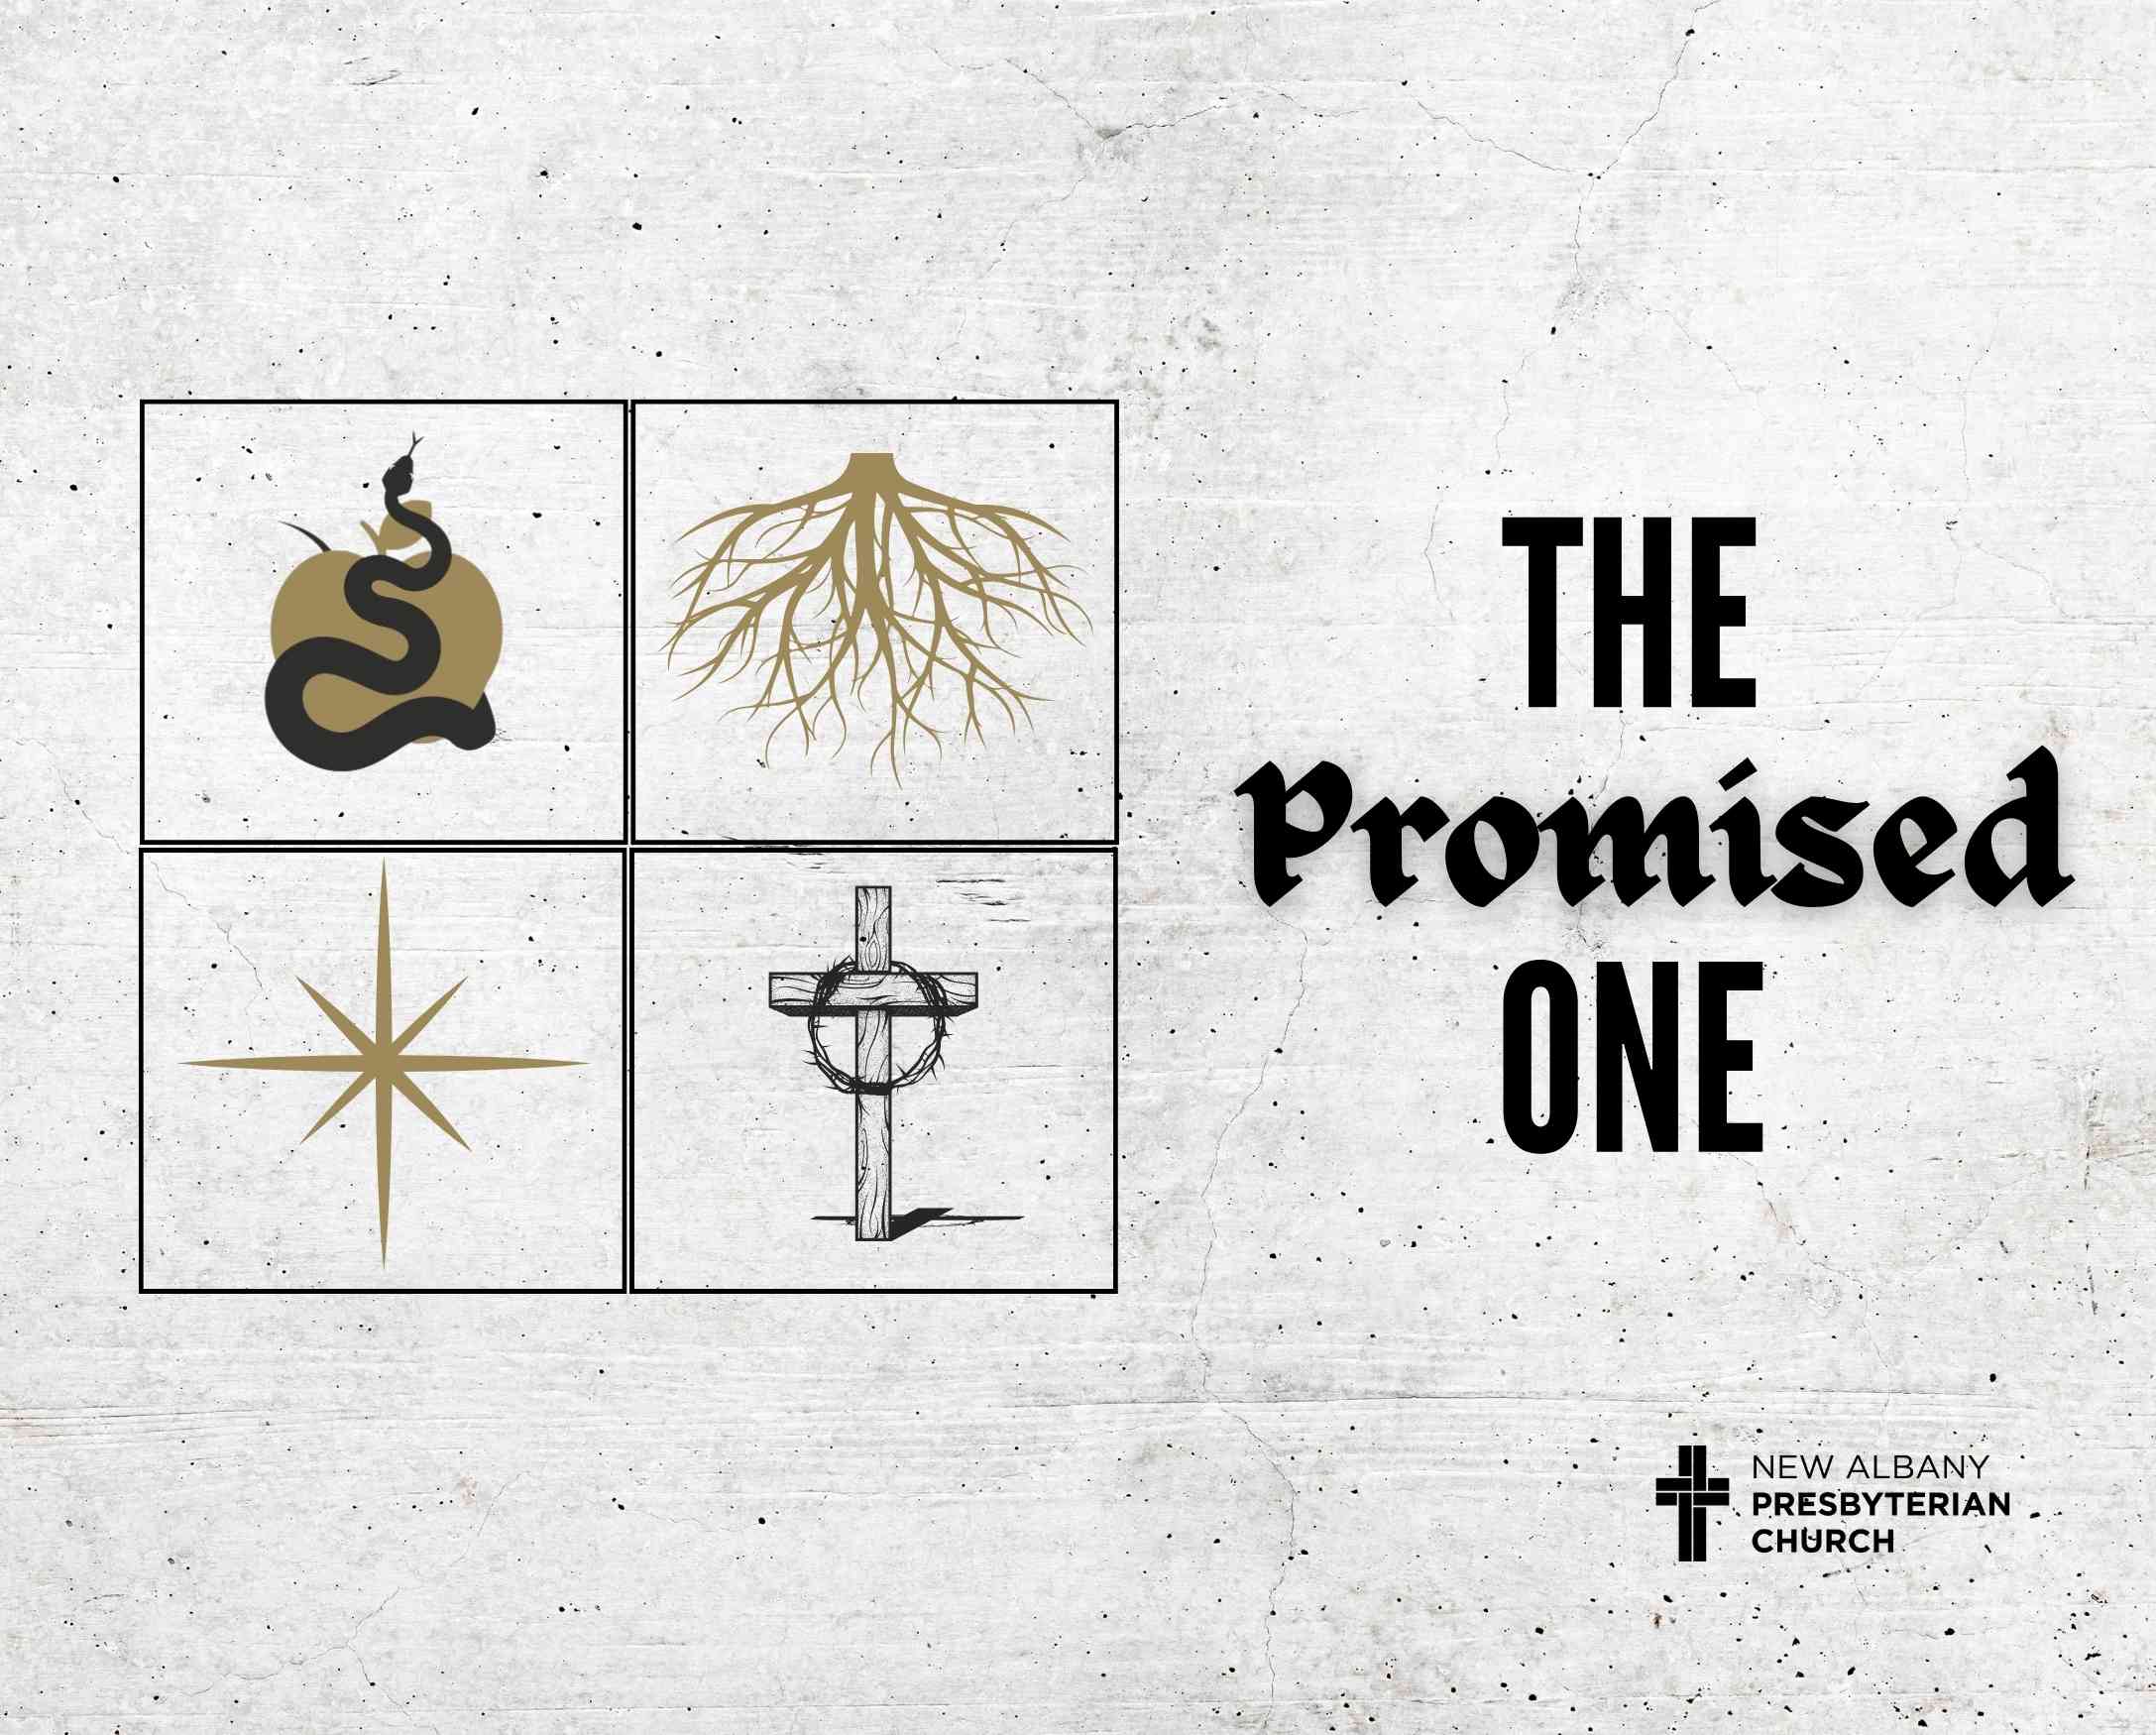 The Promised One: The First Good News